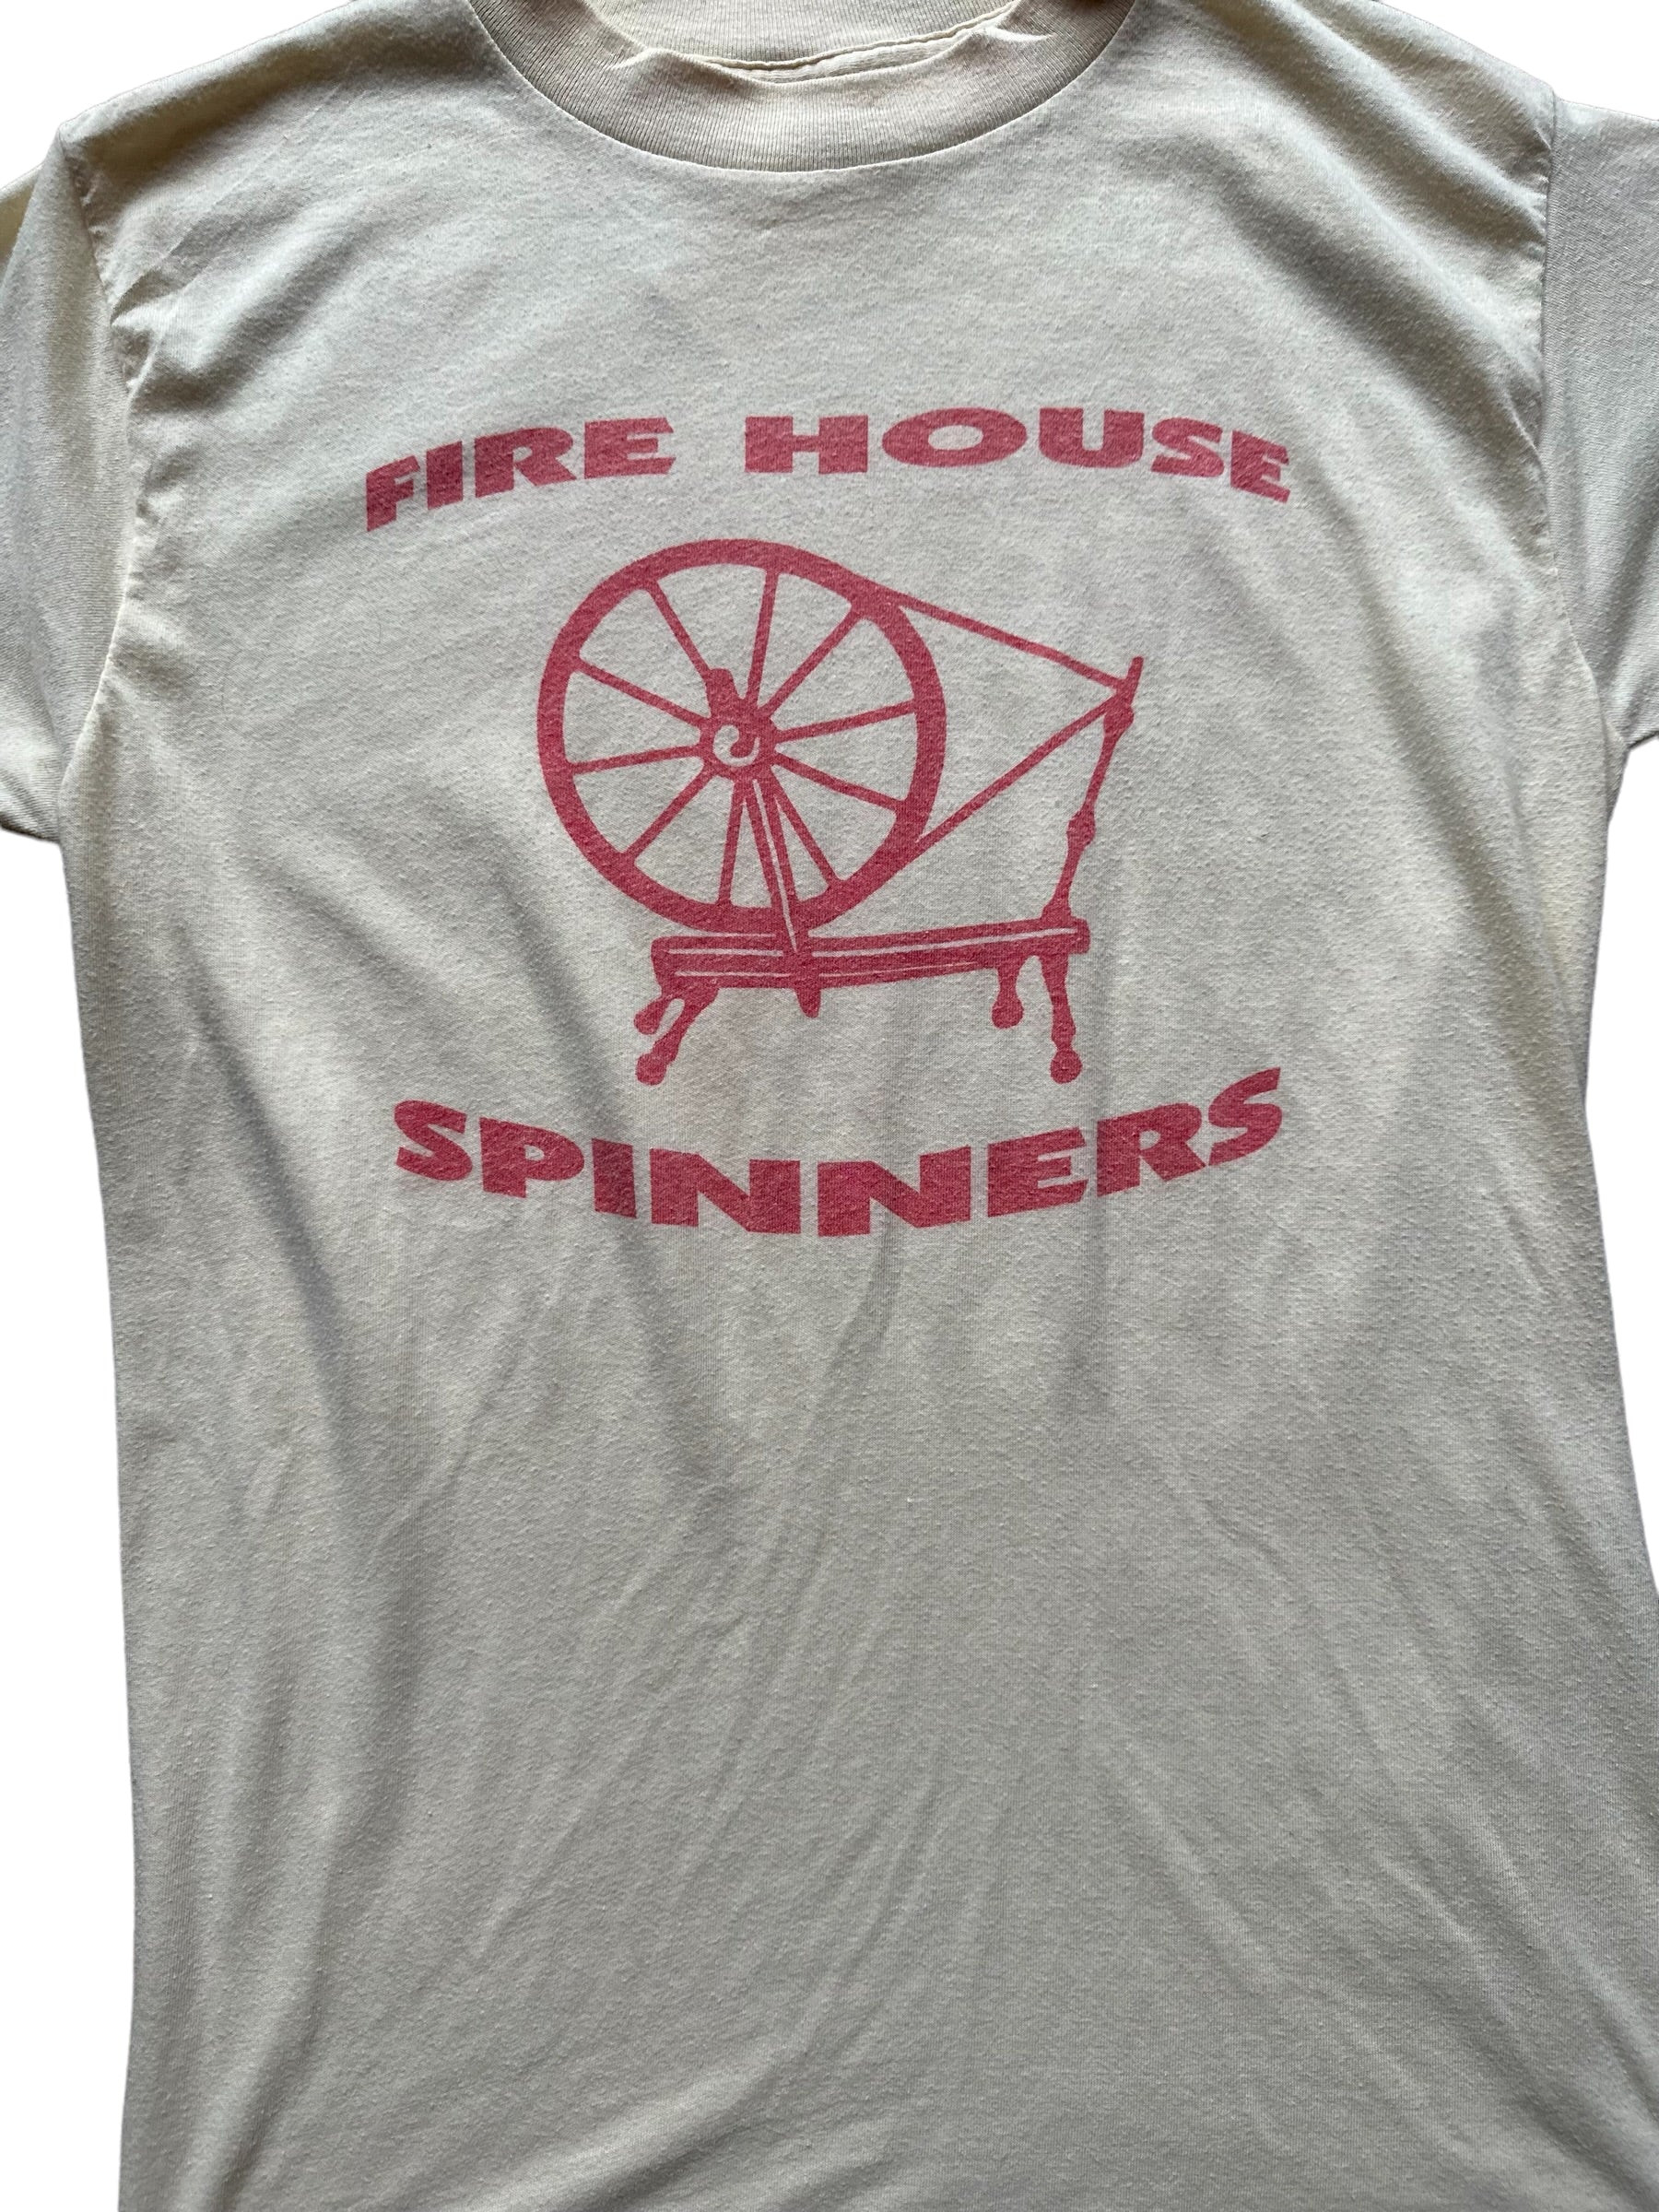 Front Graphic Close Up on Vintage Fire House Spinners Tee Size Large|  Vintage T Shirt Seattle | Barn Owl Vintage Tee